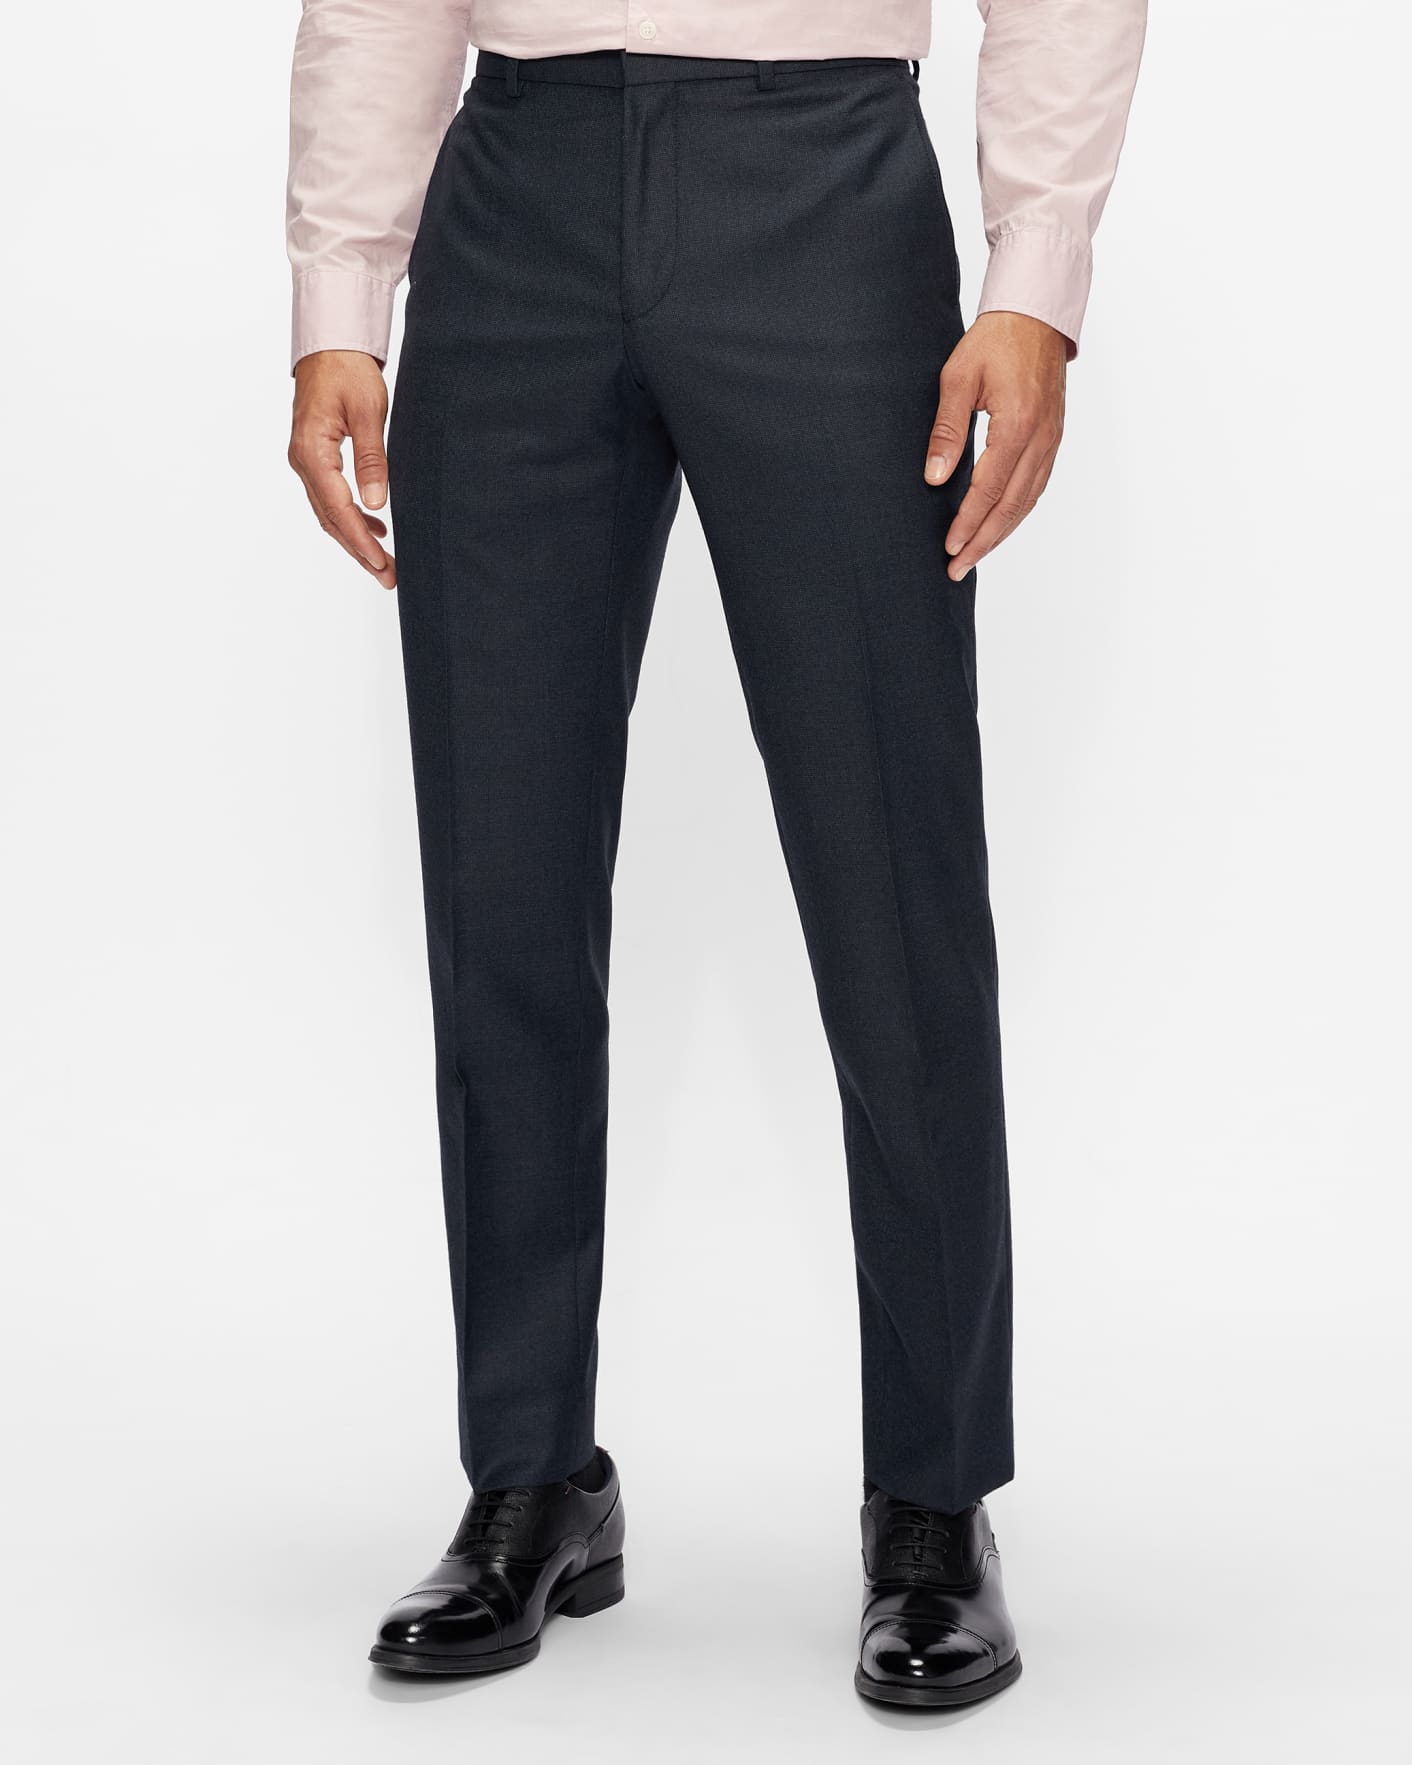 Ted Baker Textured Trousers in Navy Mens Clothing Trousers Blue Slacks and Chinos Formal trousers for Men 